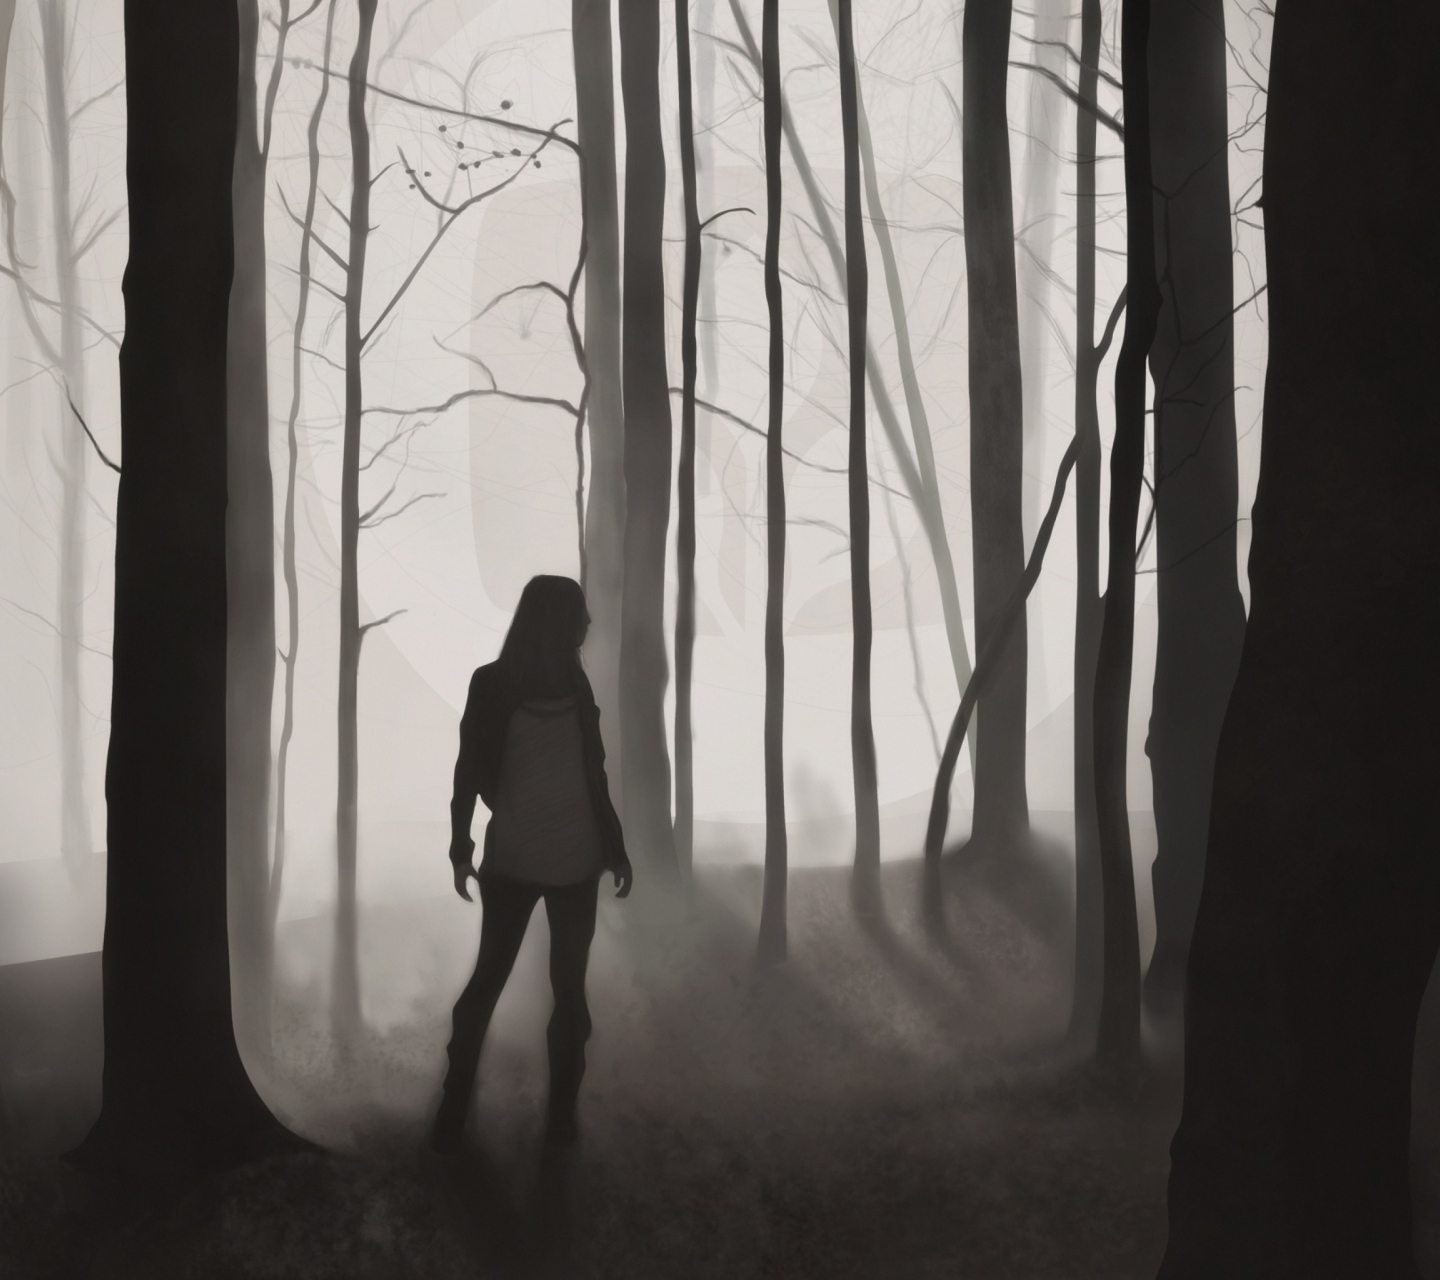 Girl In Forest Drawing screenshot #1 1440x1280